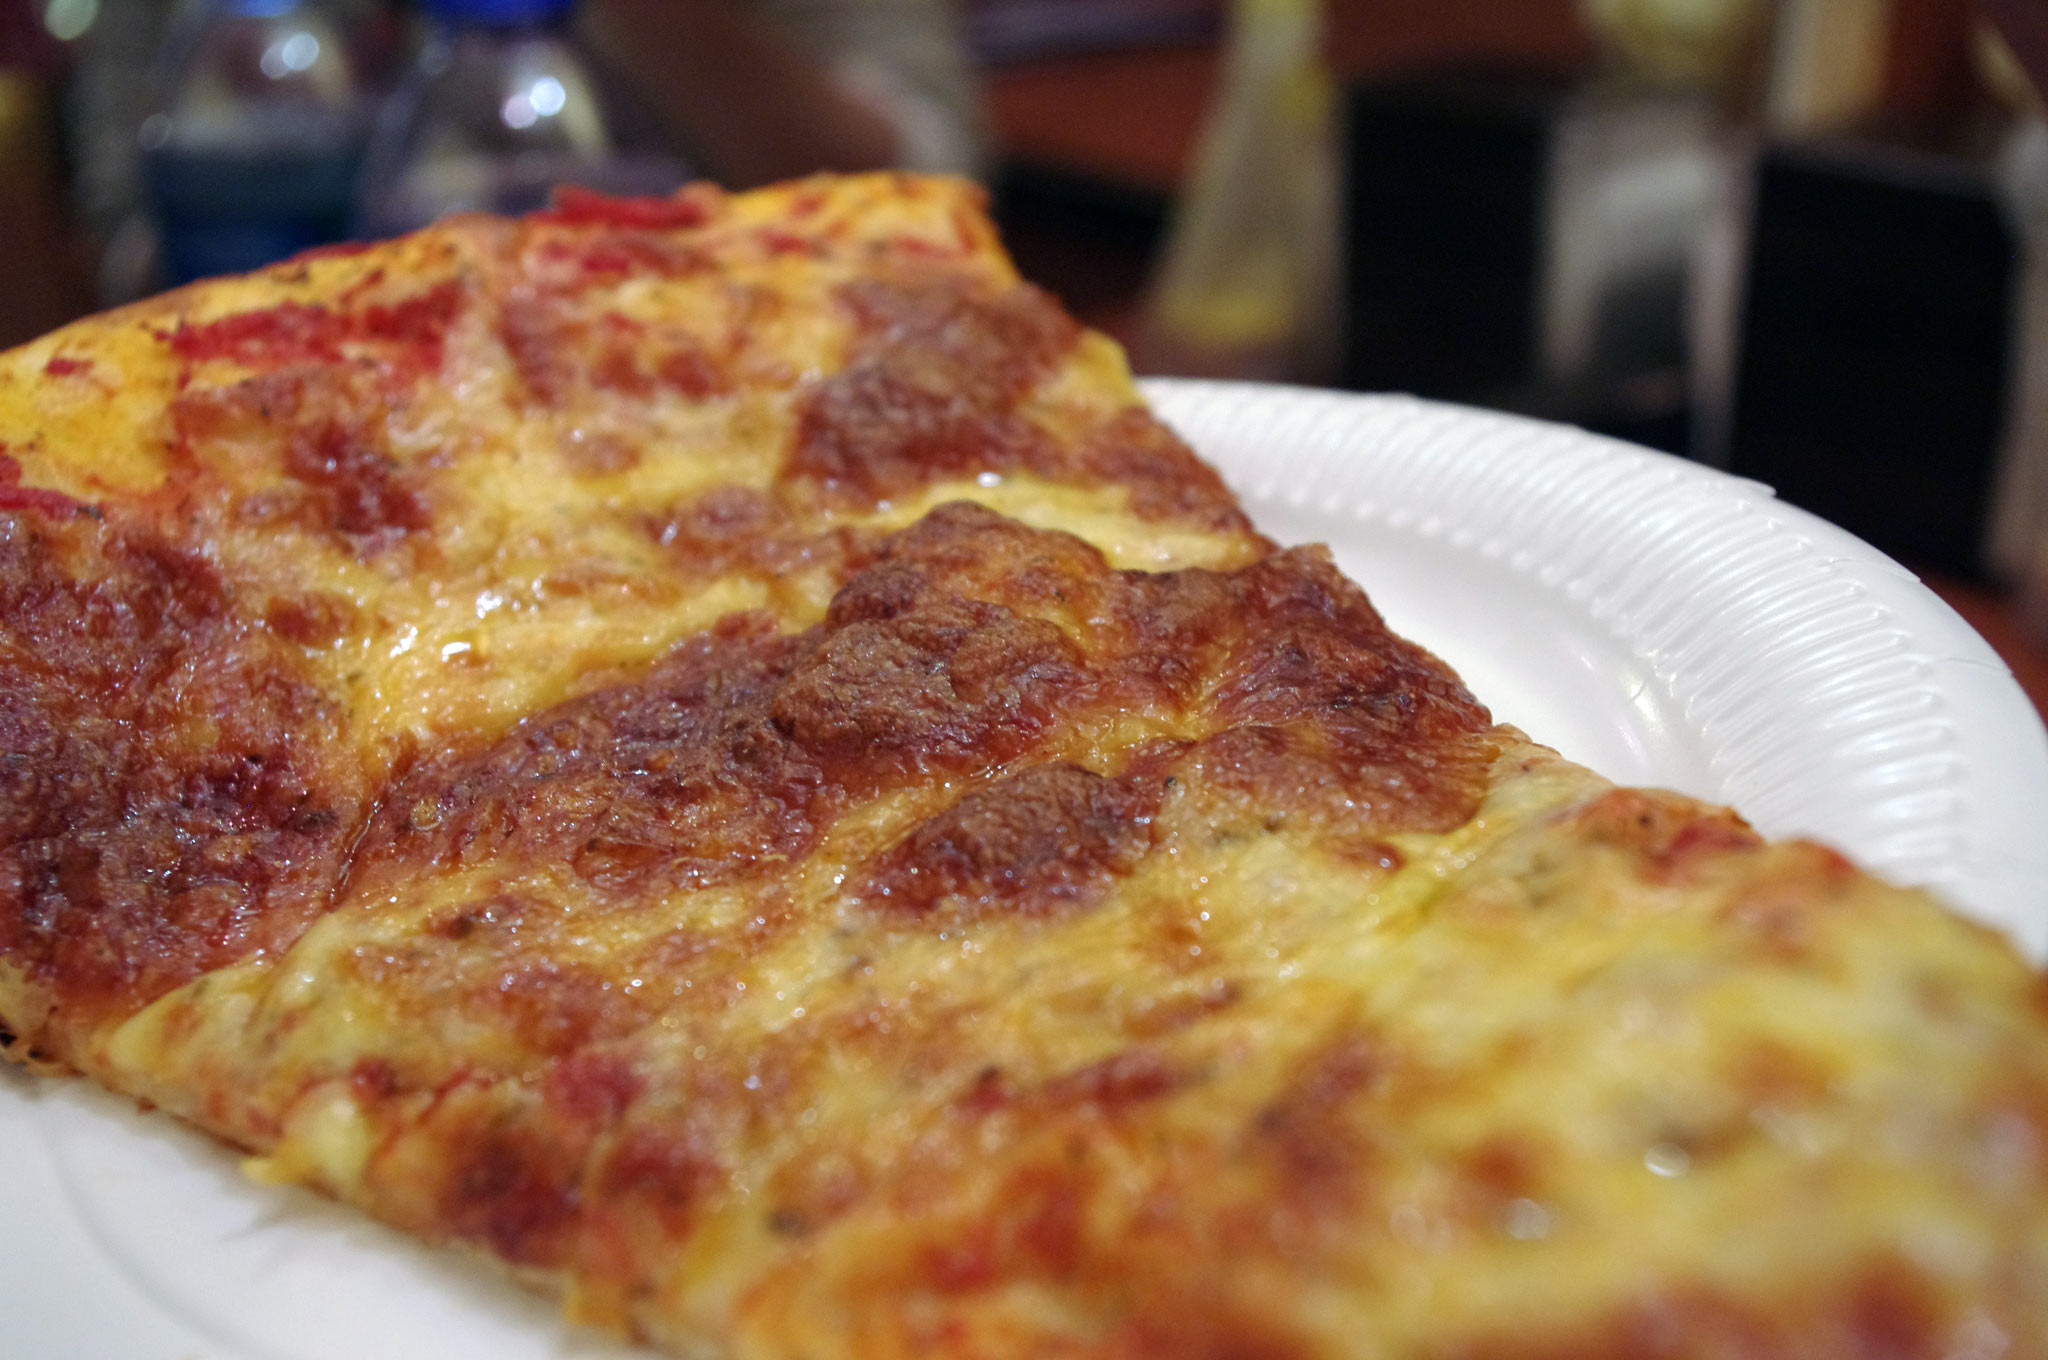 Pizza at Paisano's Pizzeria & Sub Shop in Hong Kong. Photo by alphacityguides.